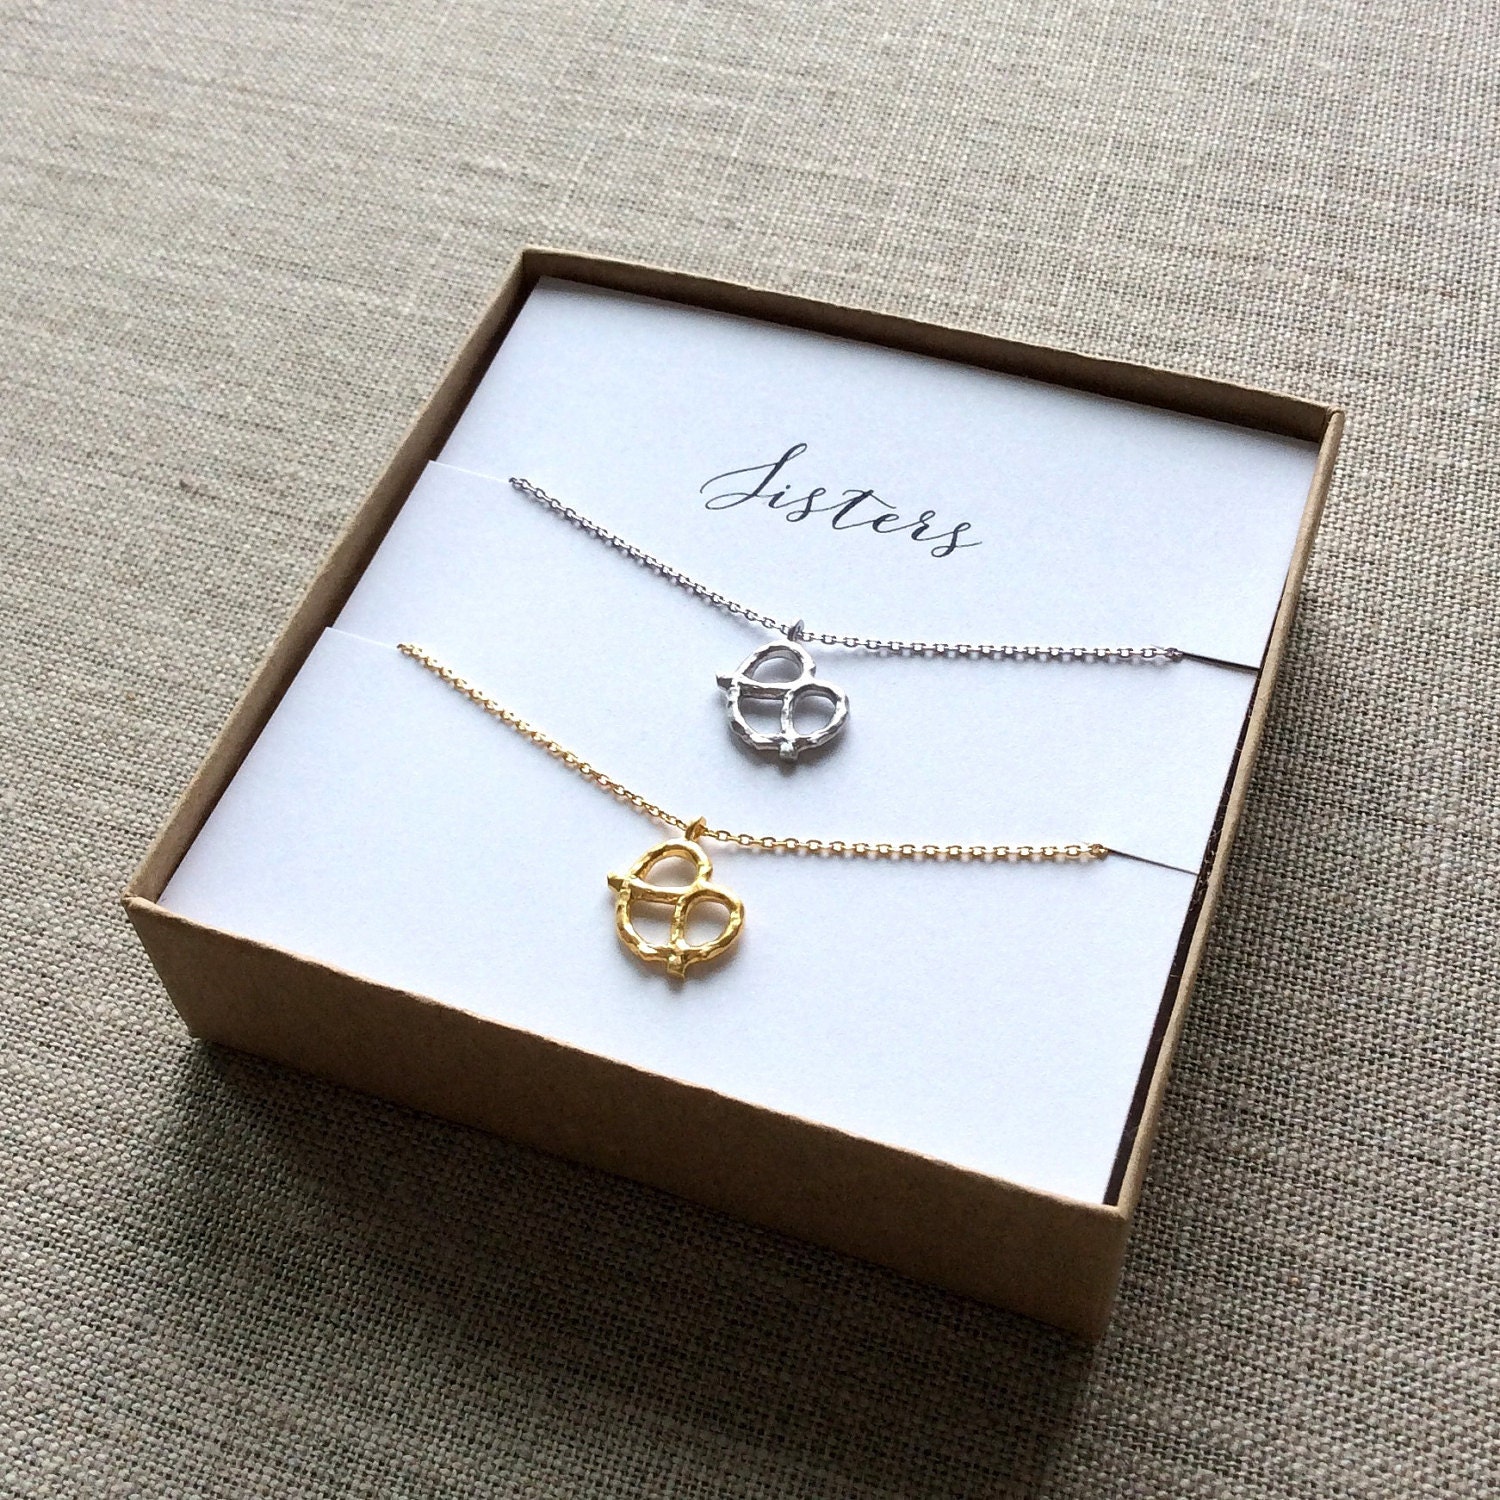 Twin Sisters Necklace, Matching necklaces, necklaces for sisters, pretzel charm necklace, Gifts for sisters, gifts for twins, sorority twins